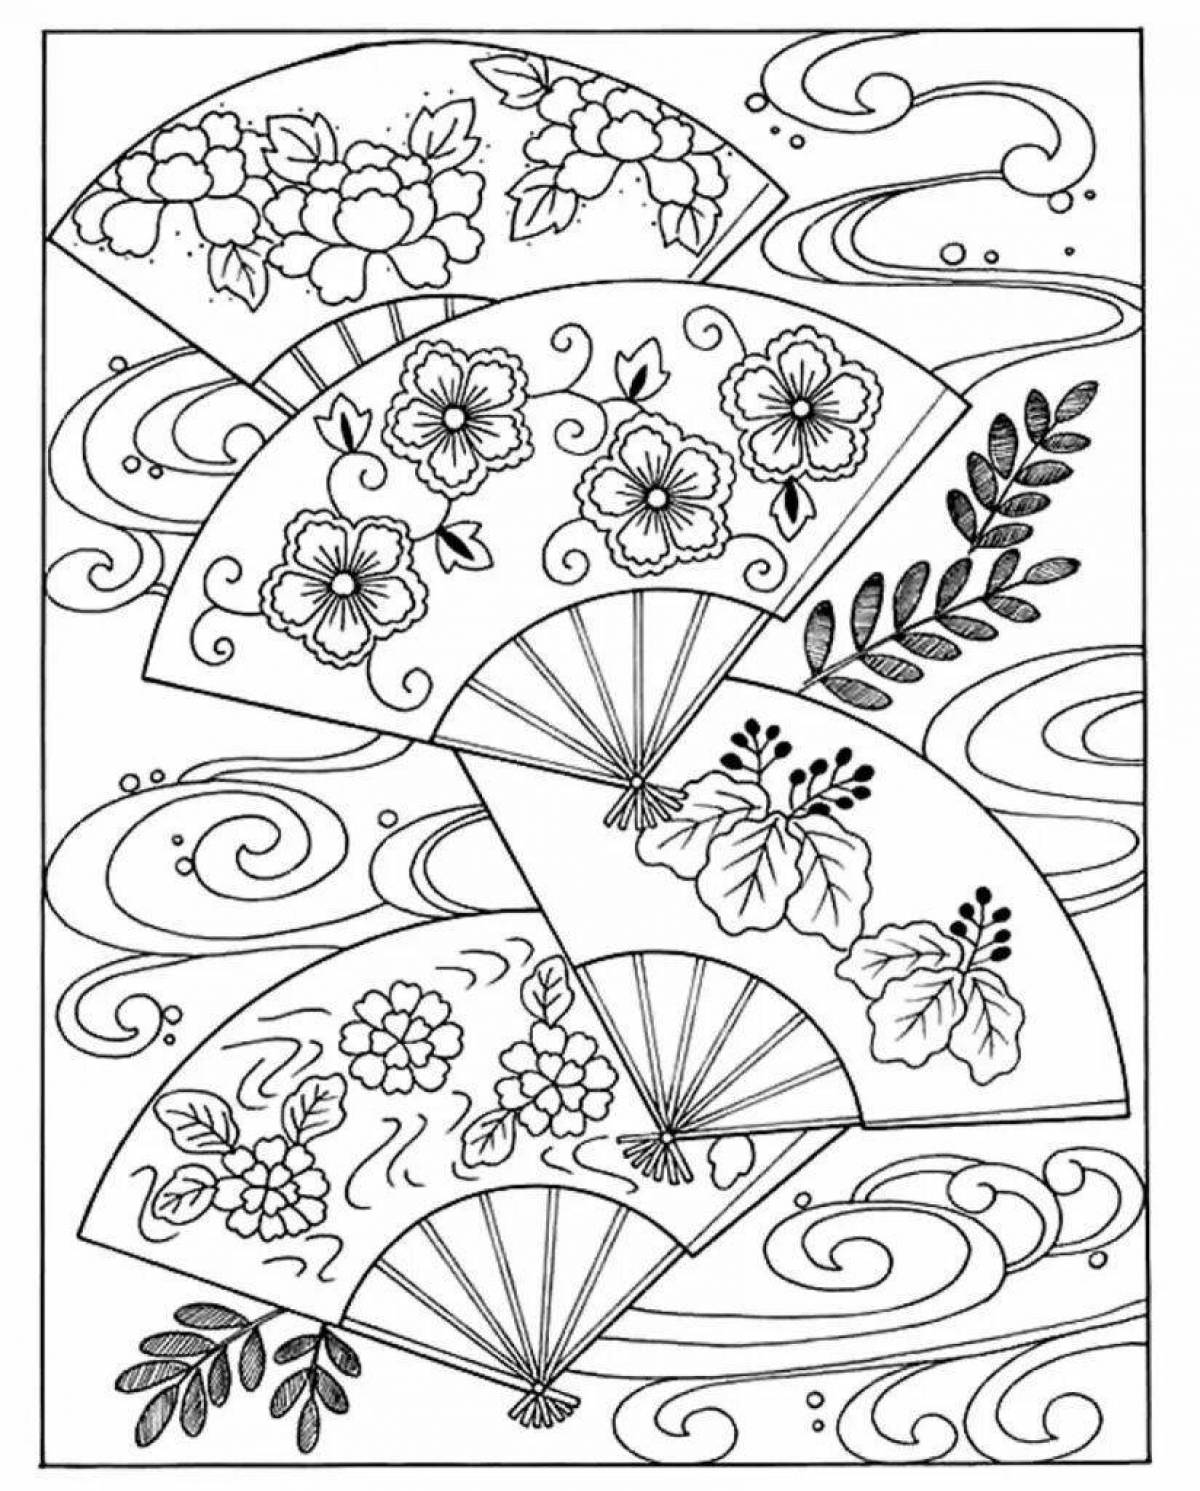 Intriguing Japanese fan coloring book